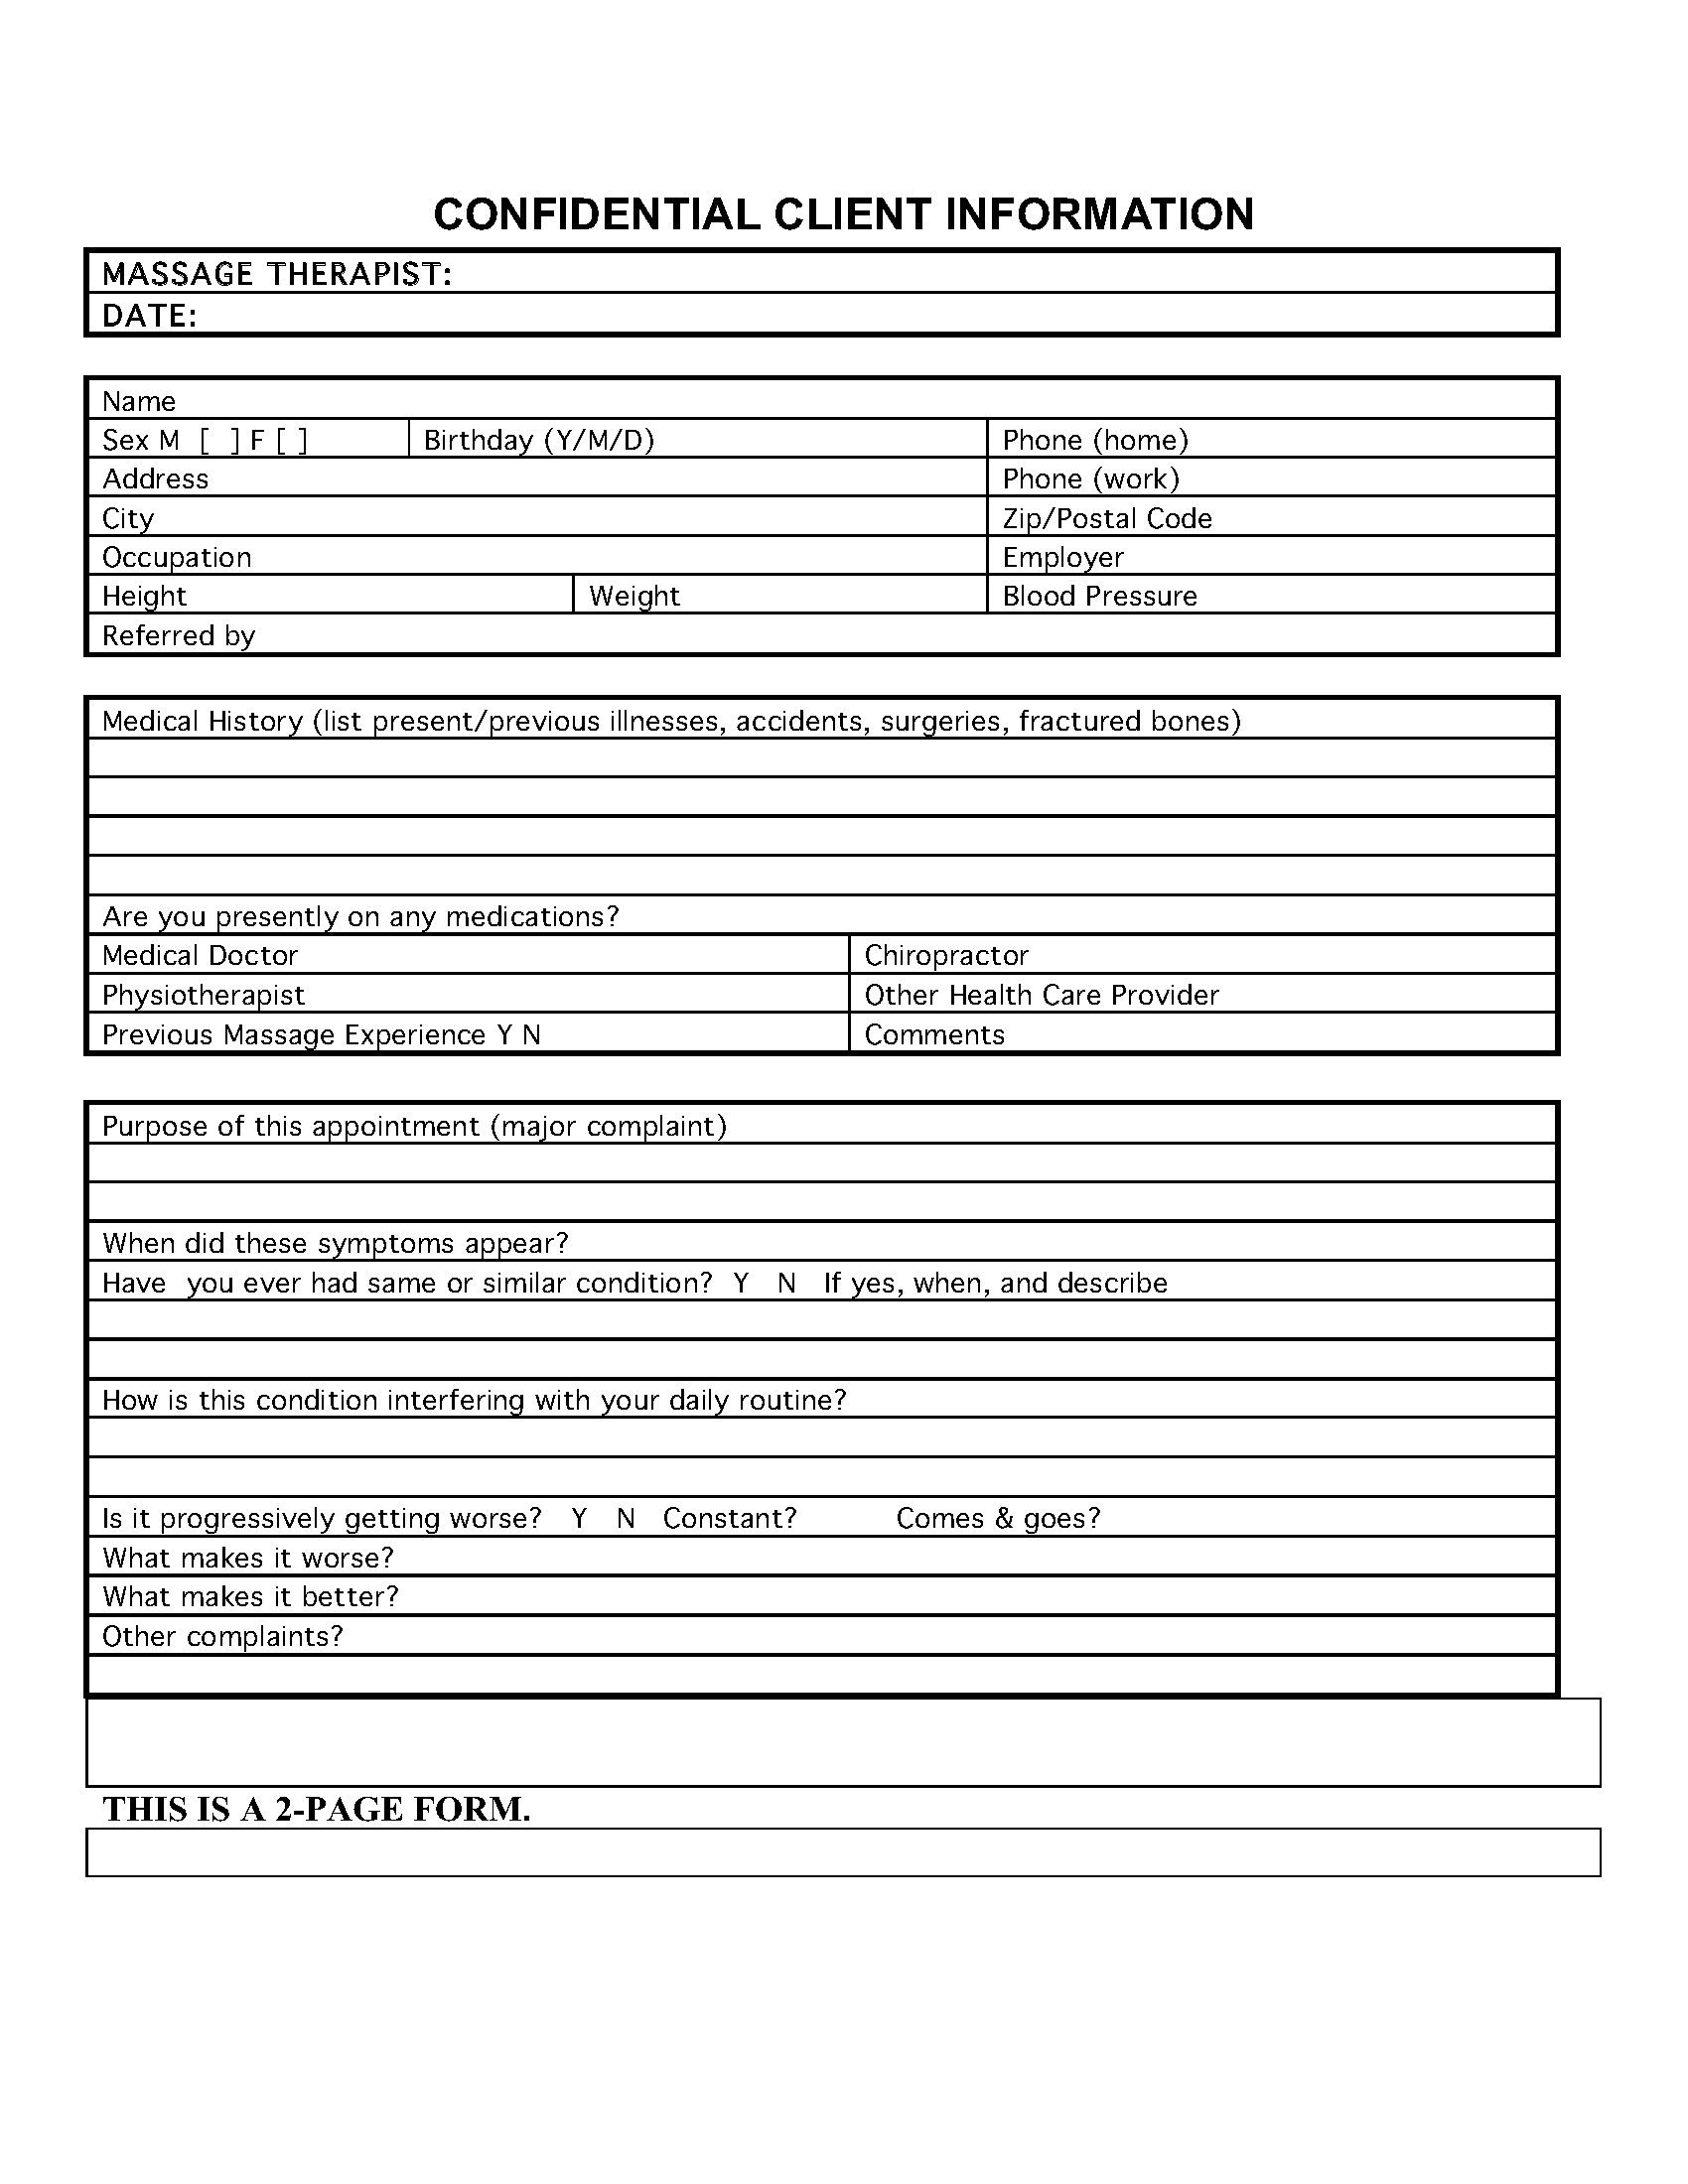 Confidential Patient Information Sheet for Massage Therapy